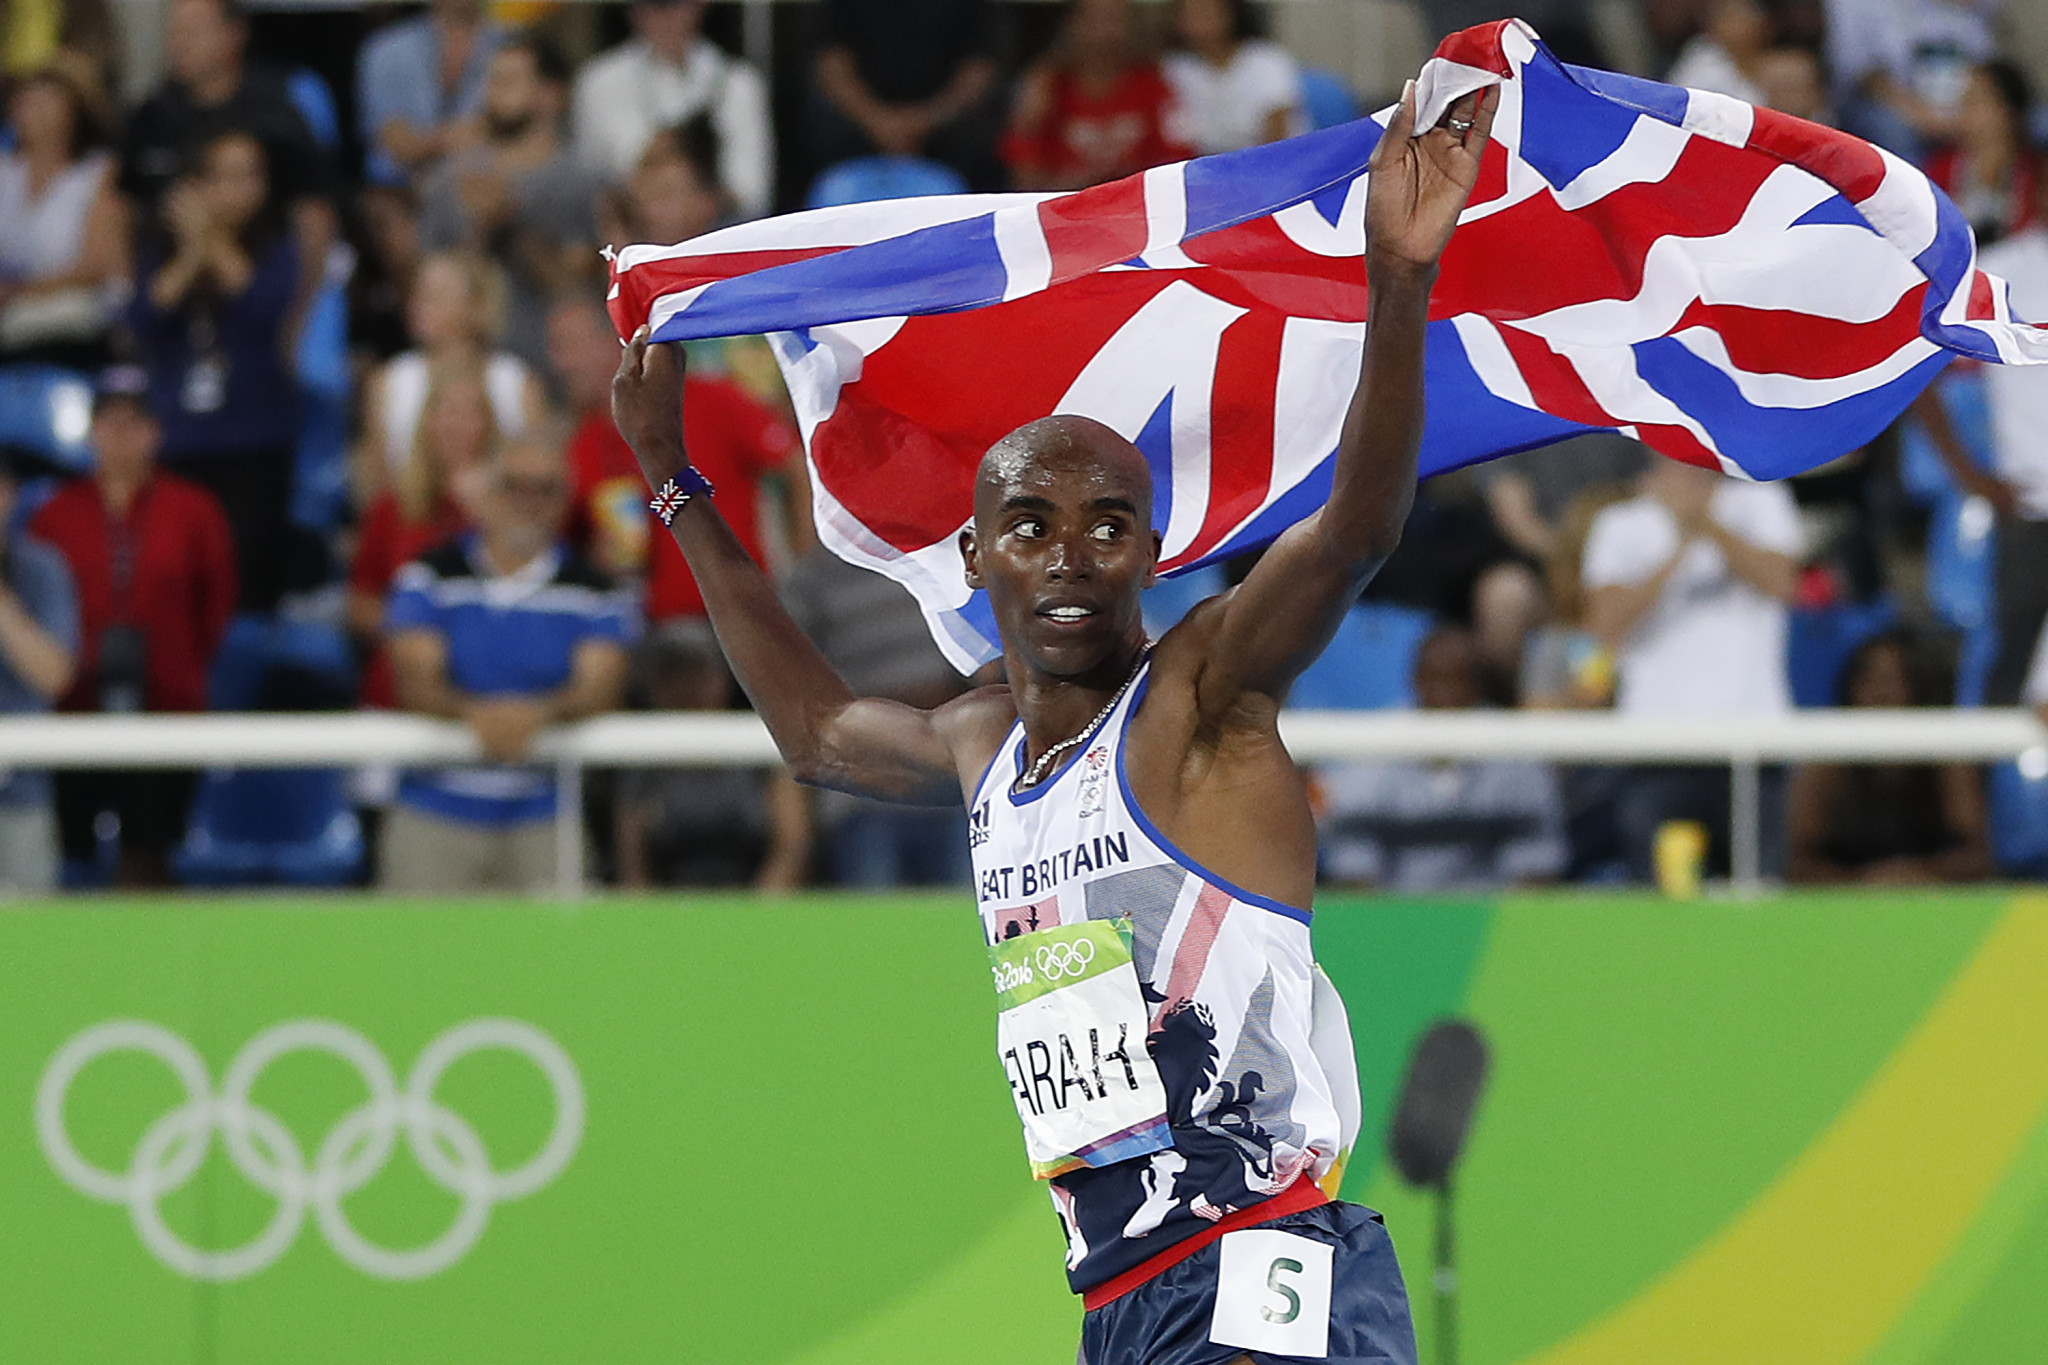 Under Alberto Salazar, Sir Mo Farah won the 5,000 and 10,000 metres at both the 2012 and 2016 Olympic Games in London and Rio de Janeiro ©Getty Images